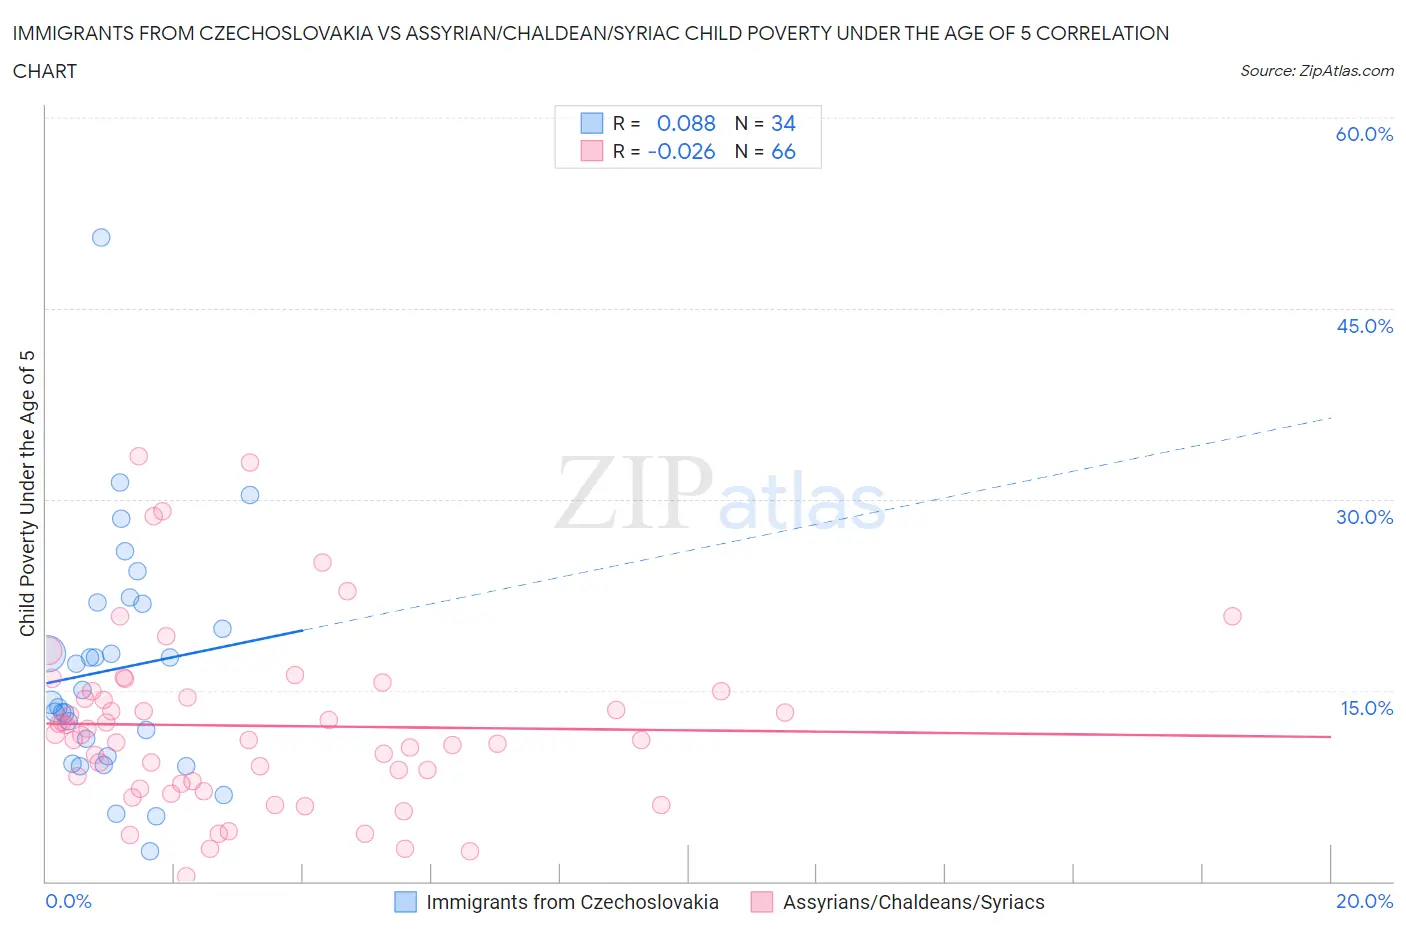 Immigrants from Czechoslovakia vs Assyrian/Chaldean/Syriac Child Poverty Under the Age of 5